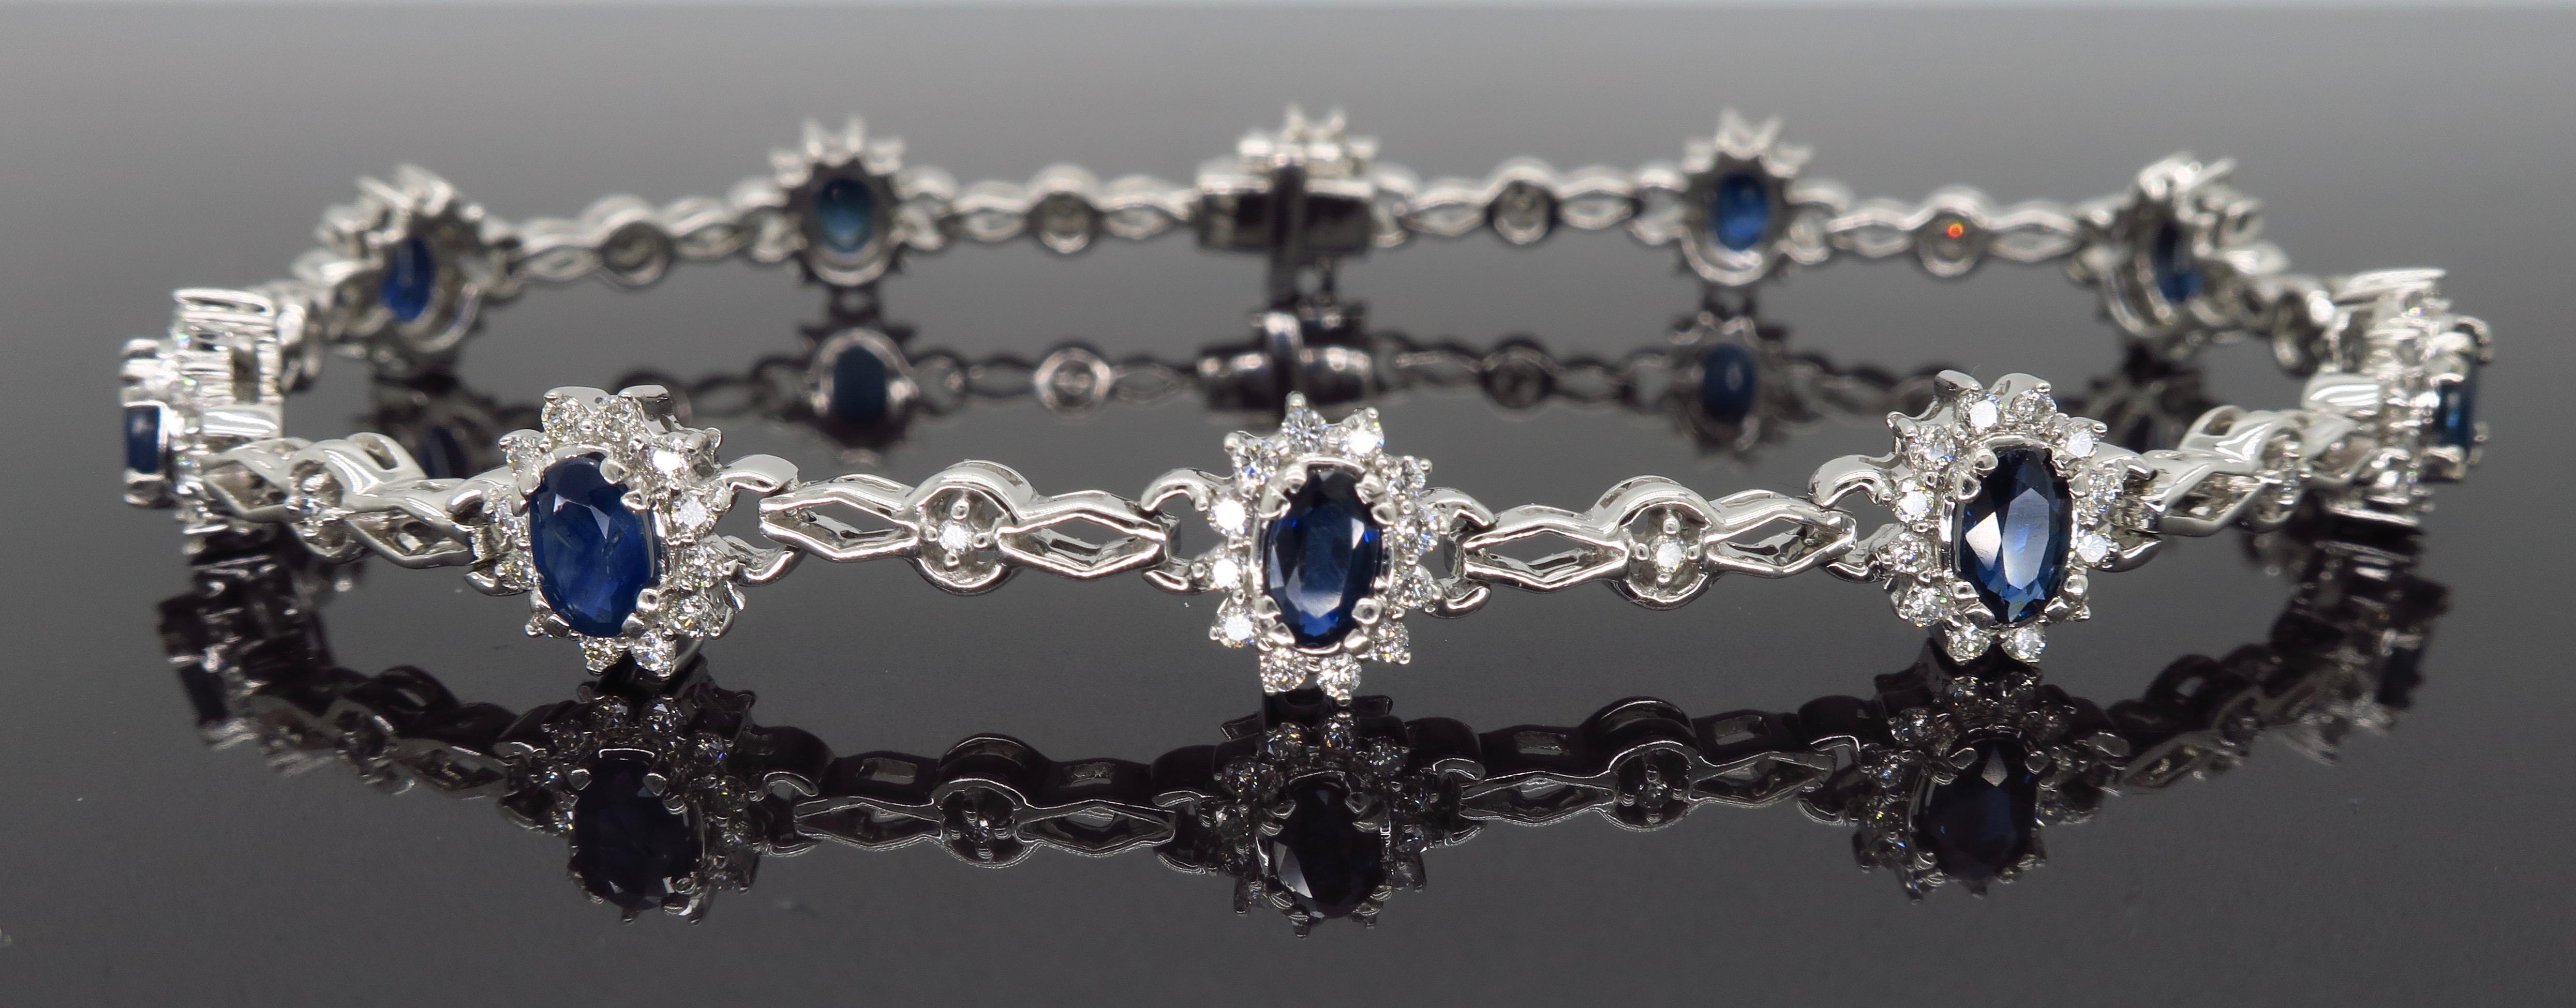 This stunning bracelet features 2.65CTW of oval cut blue sapphires surrounded by approximately 1.05CTW of Round Brilliant Cut Diamonds.

Gemstone: Sapphire & Diamond
Gemstone Carat Weight: 10 Oval Cut Blue Sapphires, 2.65CTW 
Diamond Cut: Round